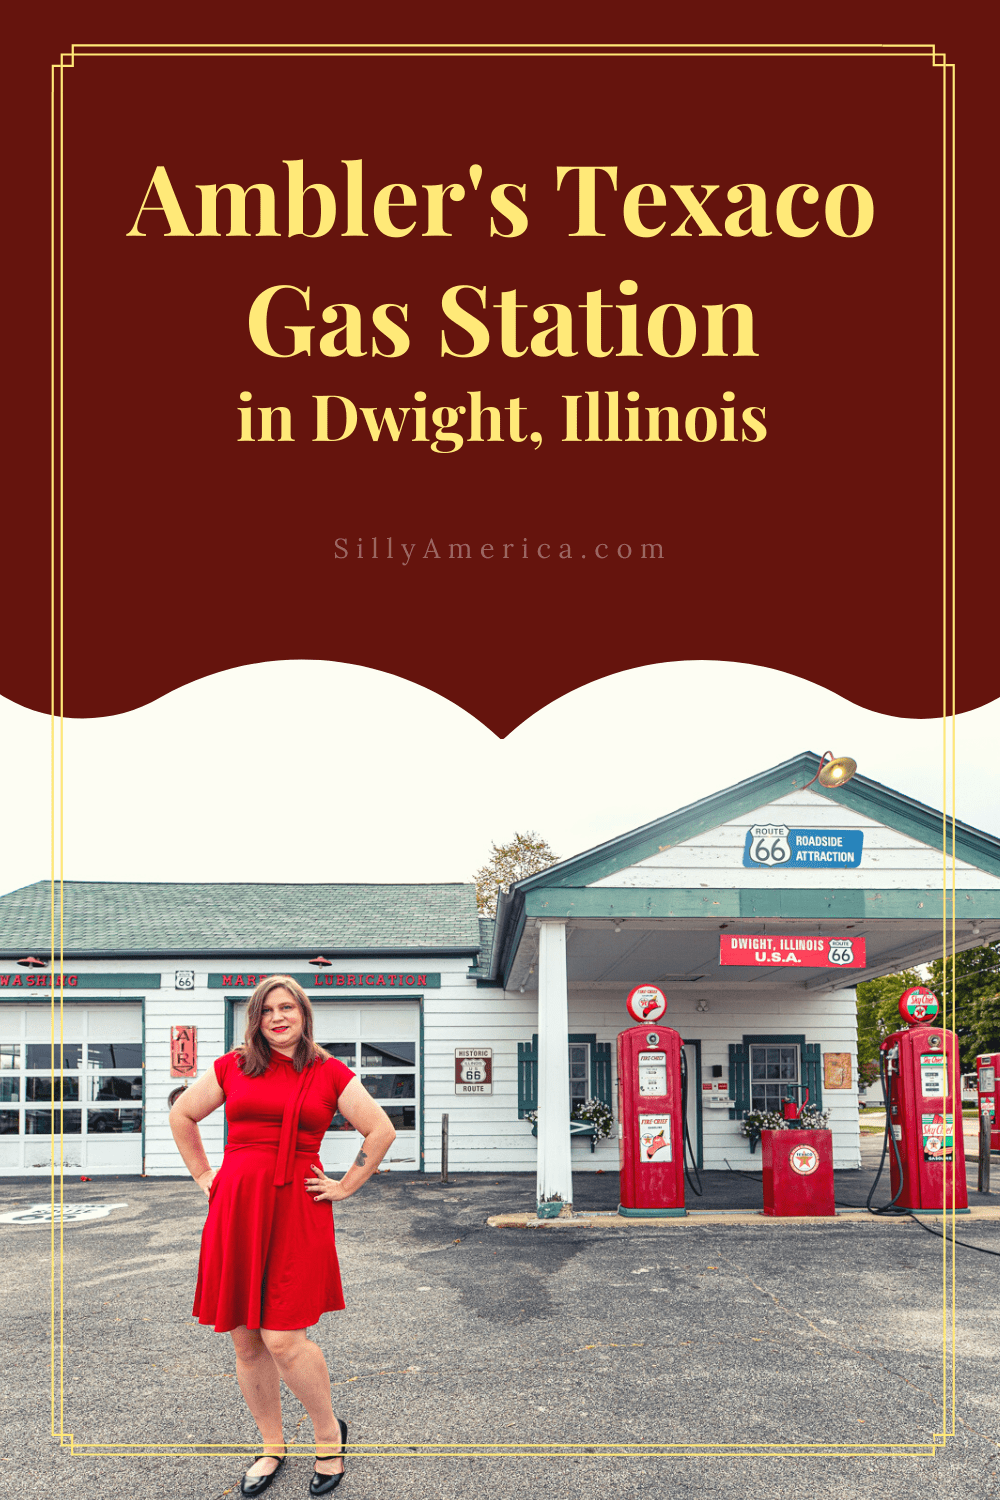 Don't amble to this Illinois Route 66 roadside attraction: Ambler's Texaco Gas Station in Dwight, Illinois. Visit this vintage Route 66 attraction on an Illinois road trip - add it to your Route 66 itinerary!  #RoadTrips #RoadTripStop #Route66 #Route66RoadTrip #IllinoisRoute66 #Illinois #IllinoisRoadTrip #IllinoisRoadsideAttractions #RoadsideAttractions #RoadsideAttraction #RoadsideAmerica #RoadTrip